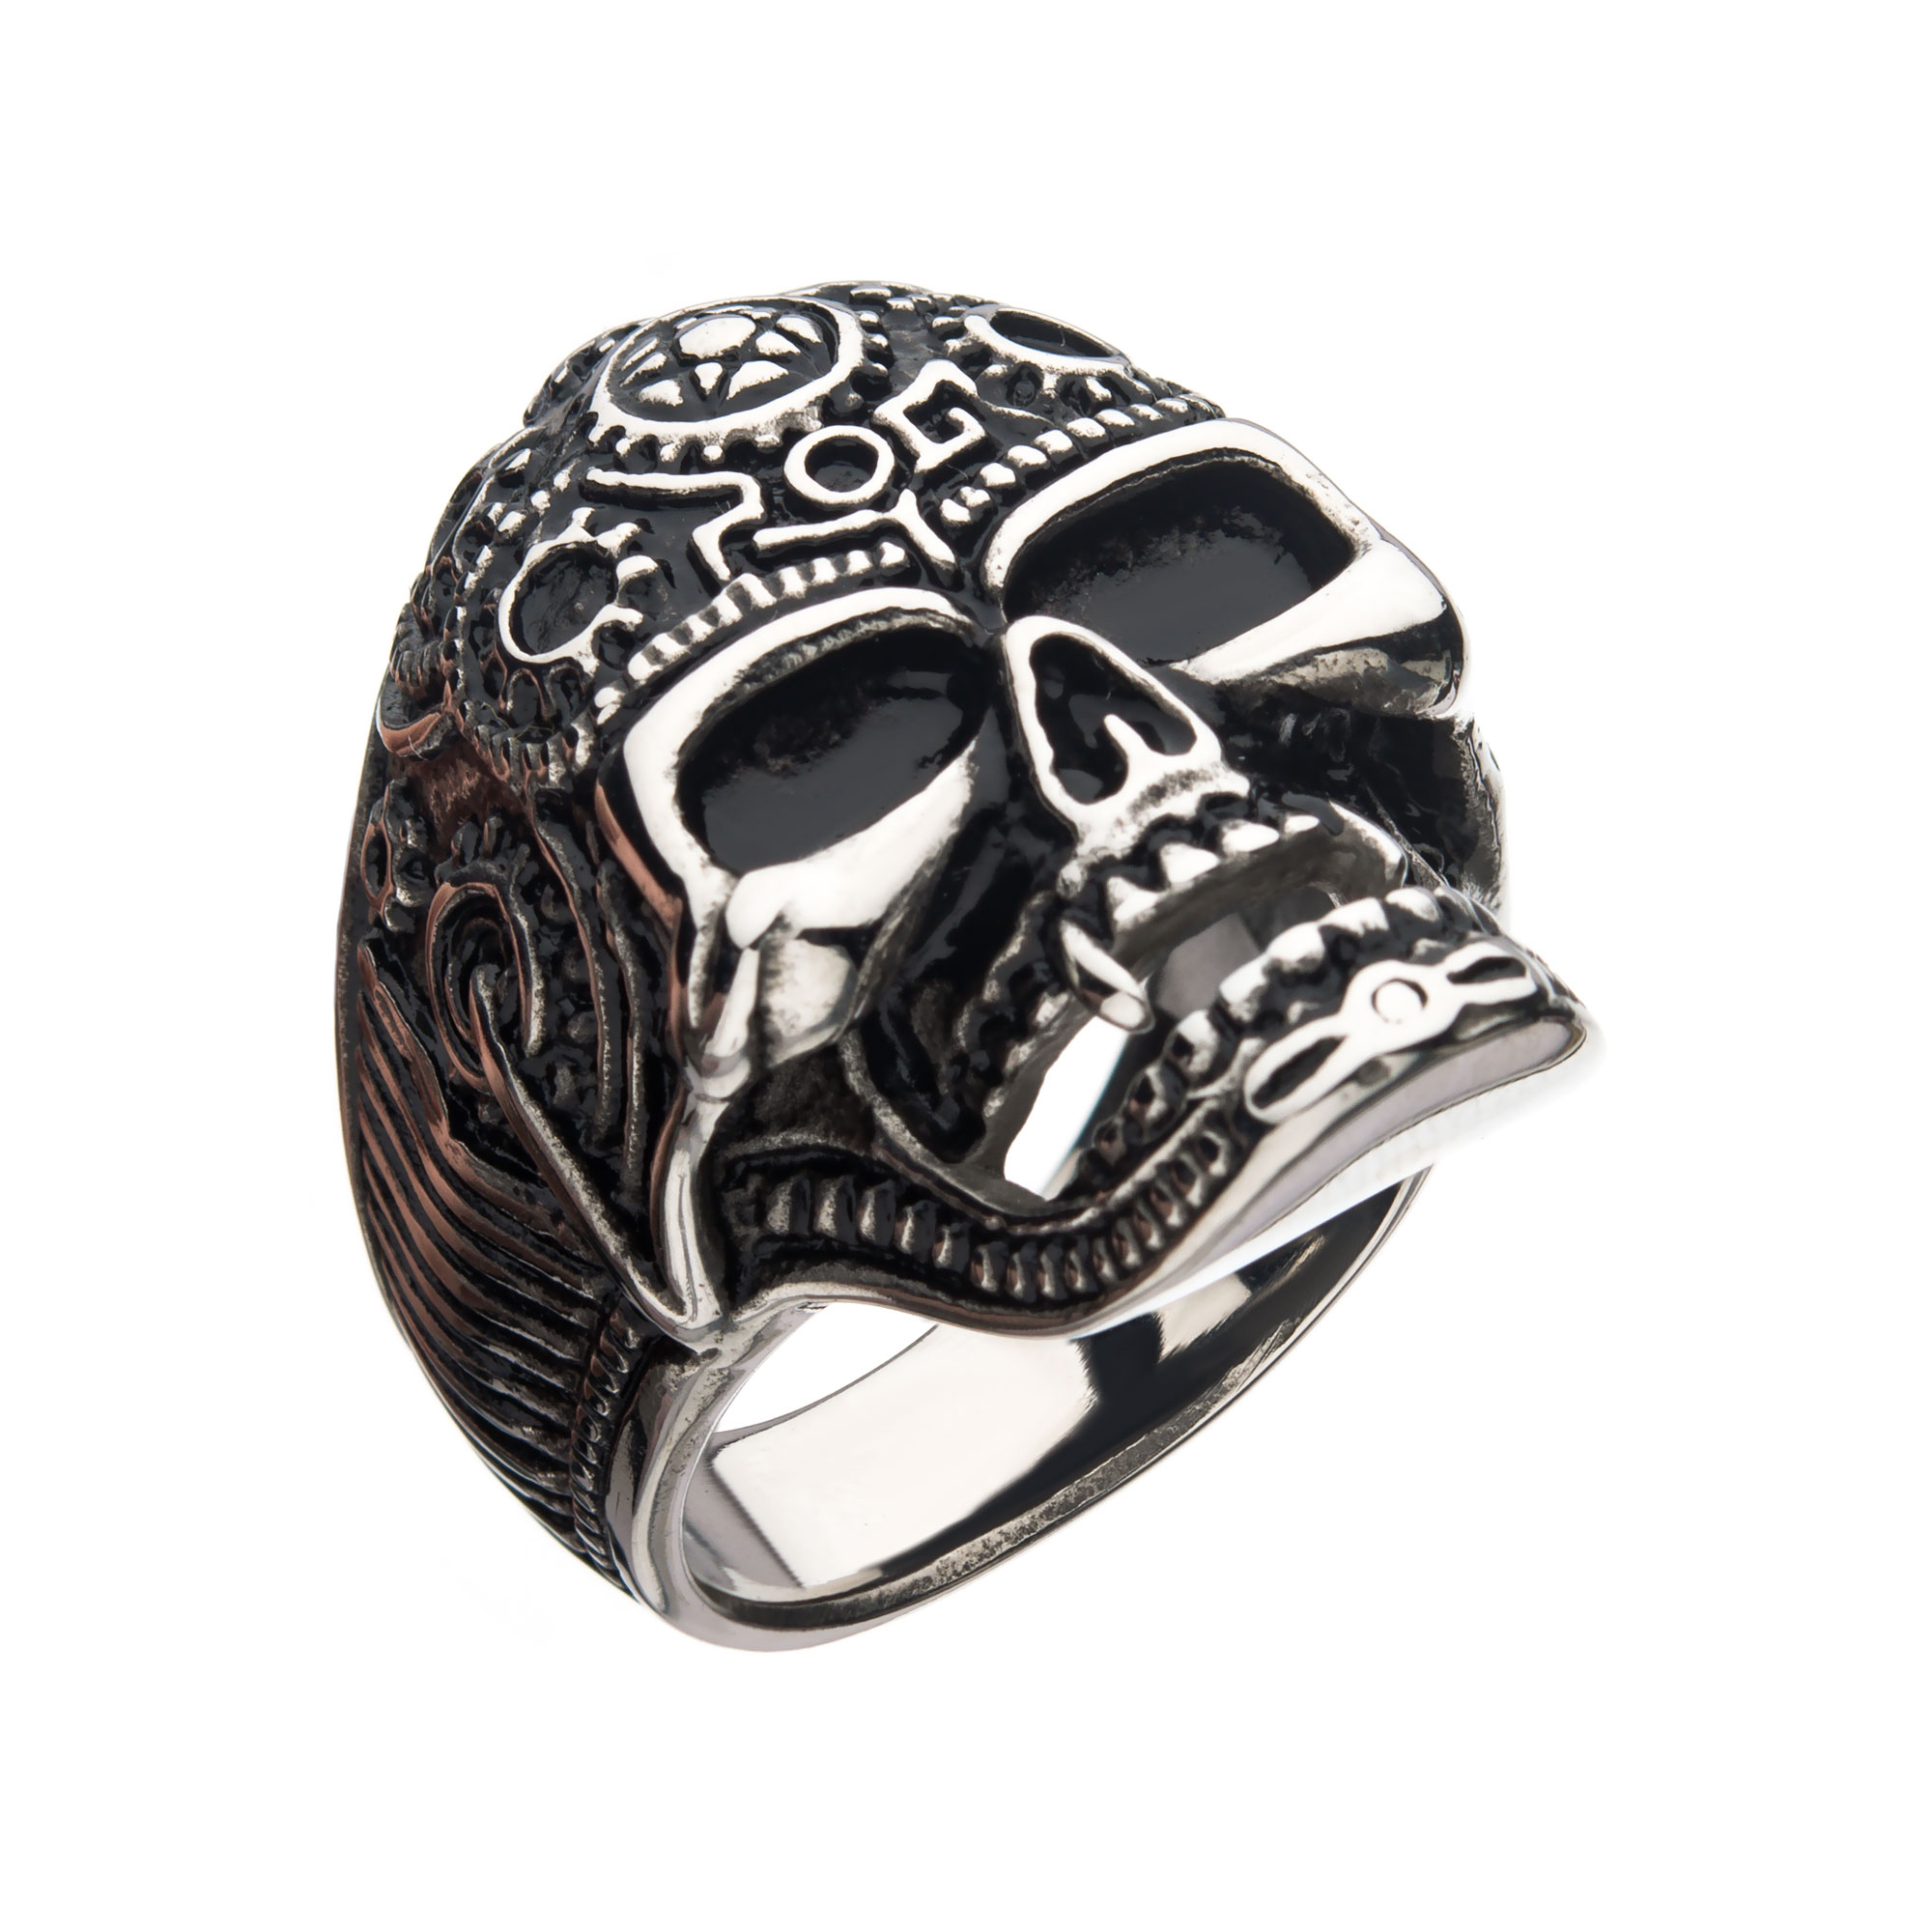 Oxidized Stainless Steel Vampire Skull Ring Lewis Jewelers, Inc. Ansonia, CT